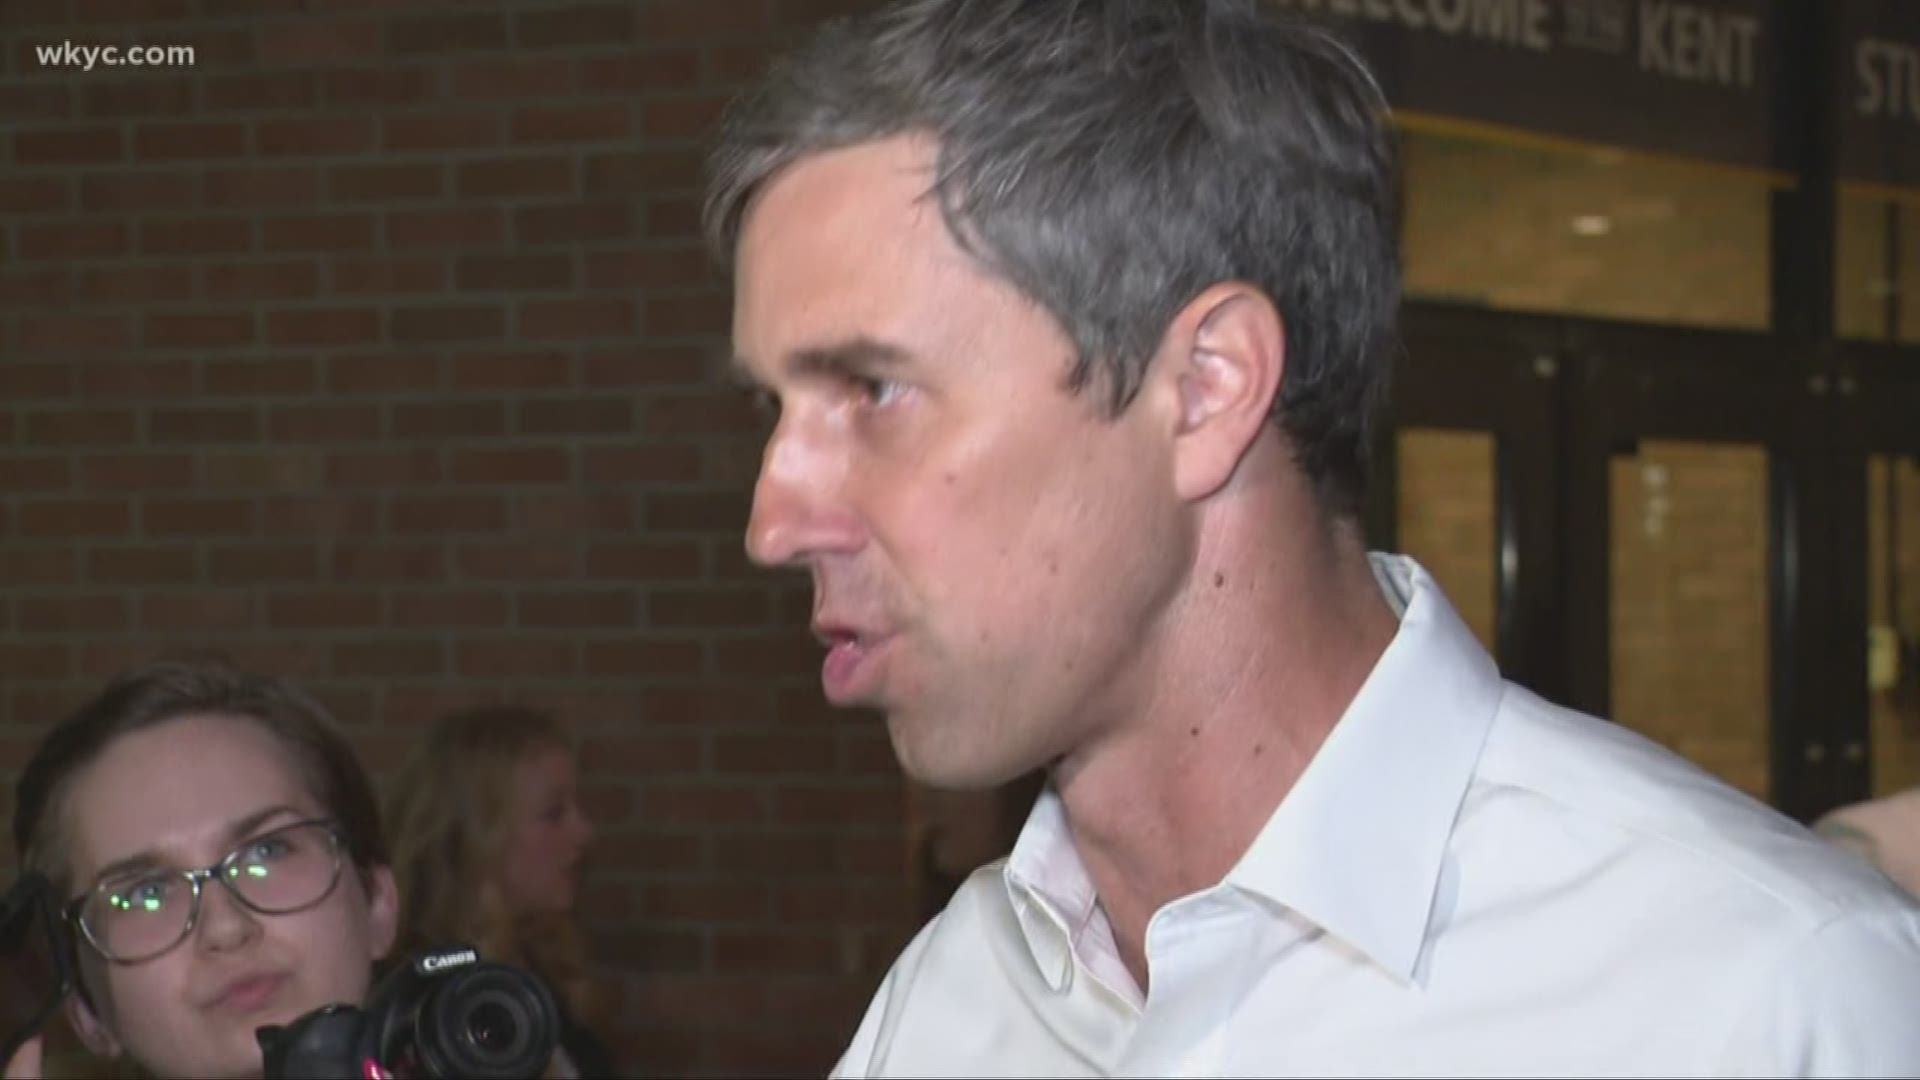 Beto O'Rourke spoke at Kent State University on Wednesday. The former Texas Congressman addressed a packed crowd outside the student center.